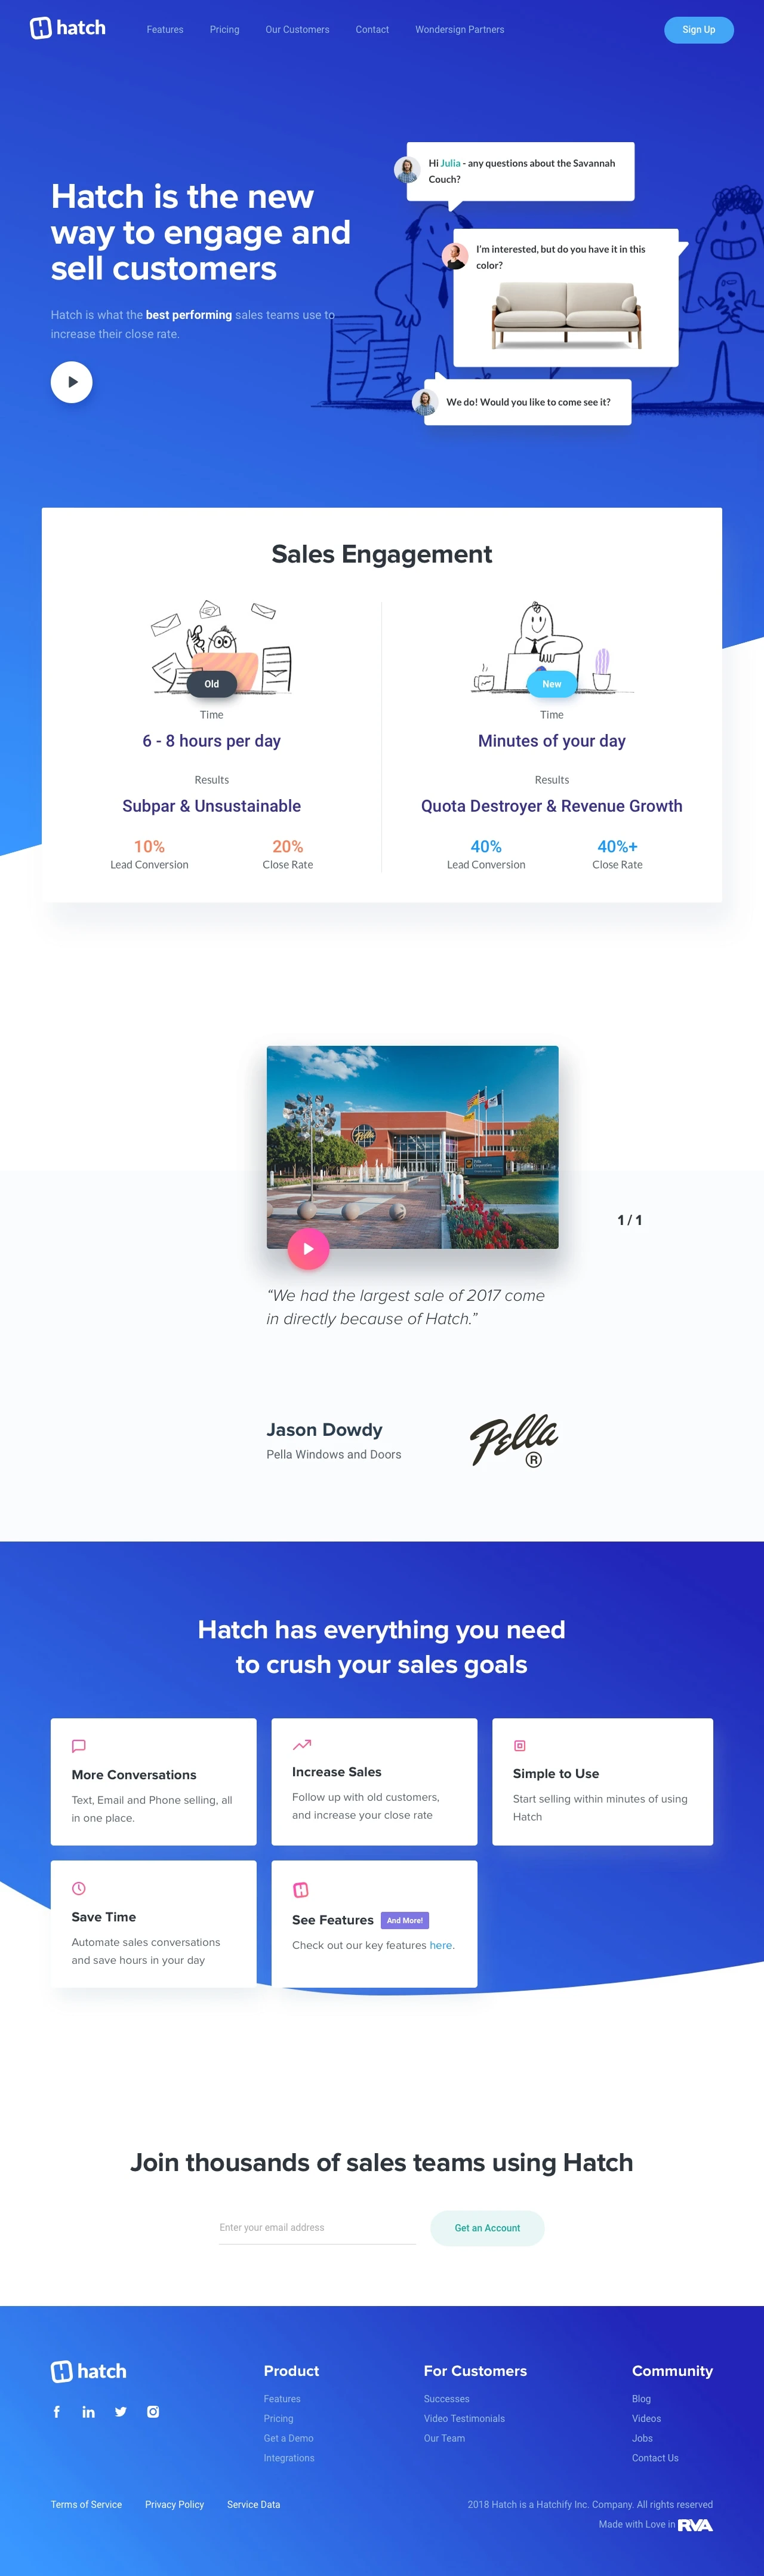 Hatch Landing Page Example: Hatch is the new way to engage and sell customers